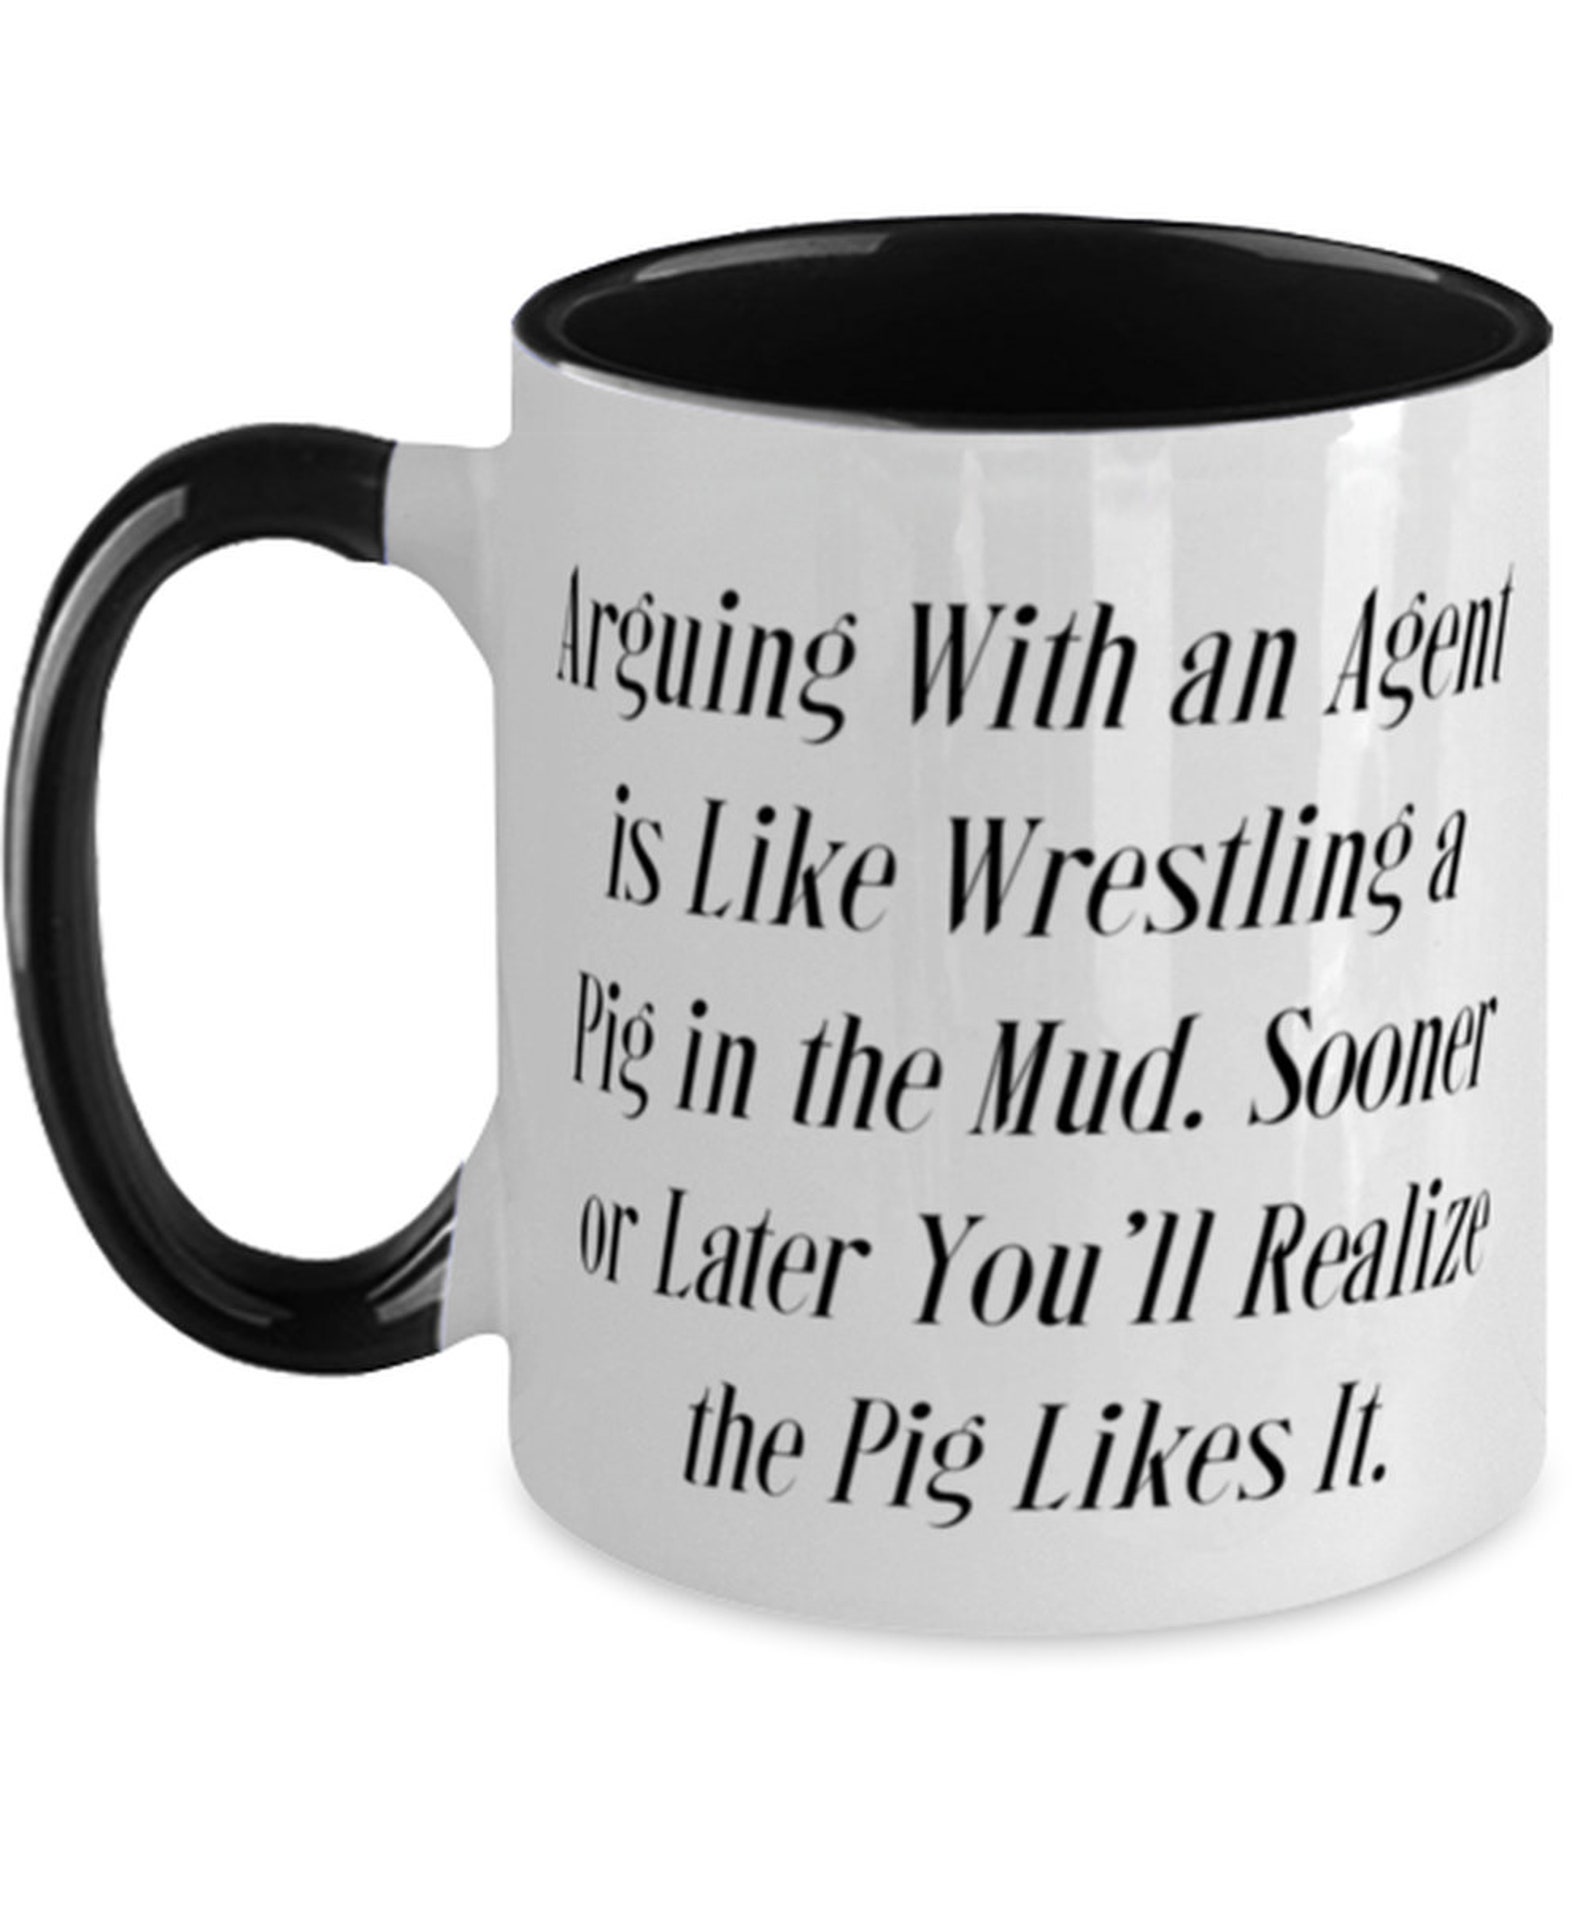 Arguing With An Agent Is Like Wrestling A Pig In The Mud. | Etsy